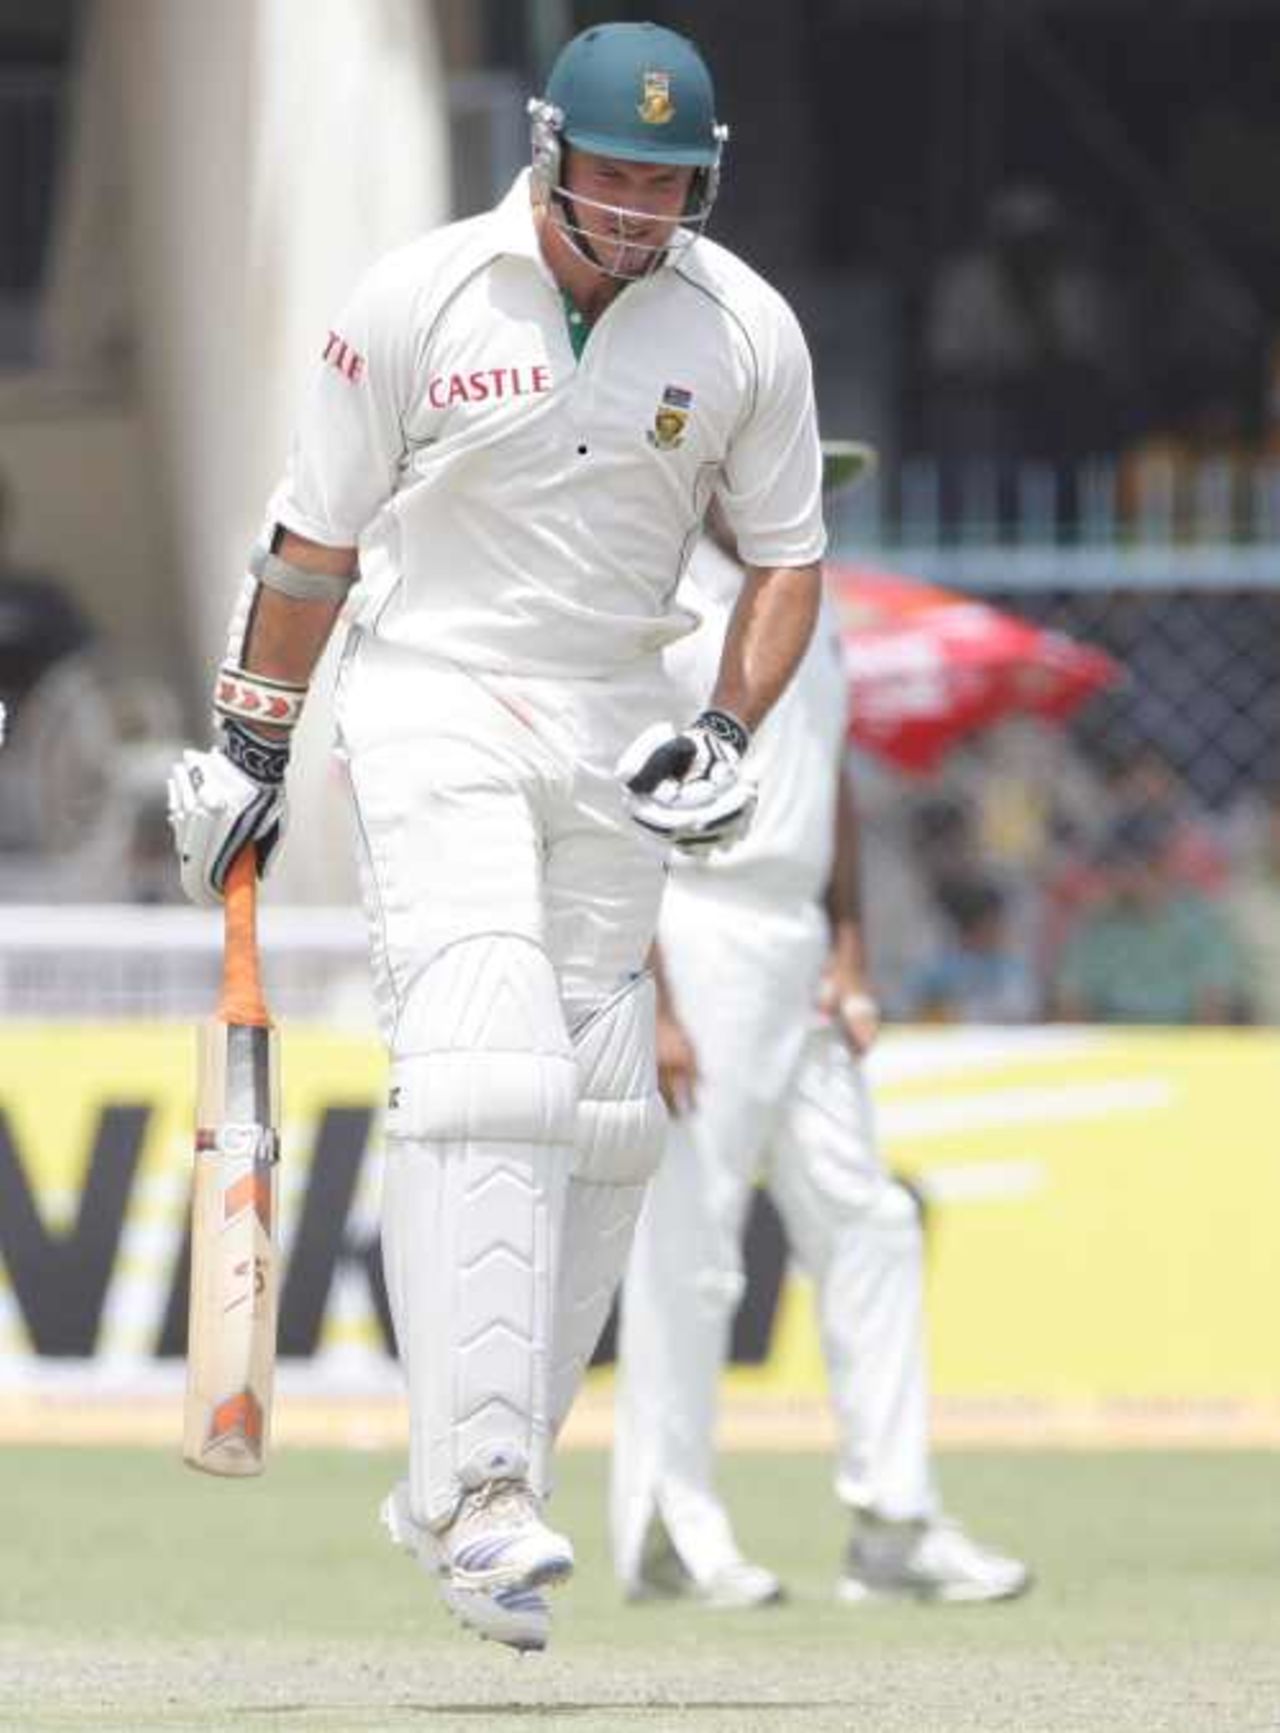 Graeme Smith winces in pain after being struck by a bouncer, India v South Africa, 3rd Test, Kanpur, 3rd day, April 13, 2008